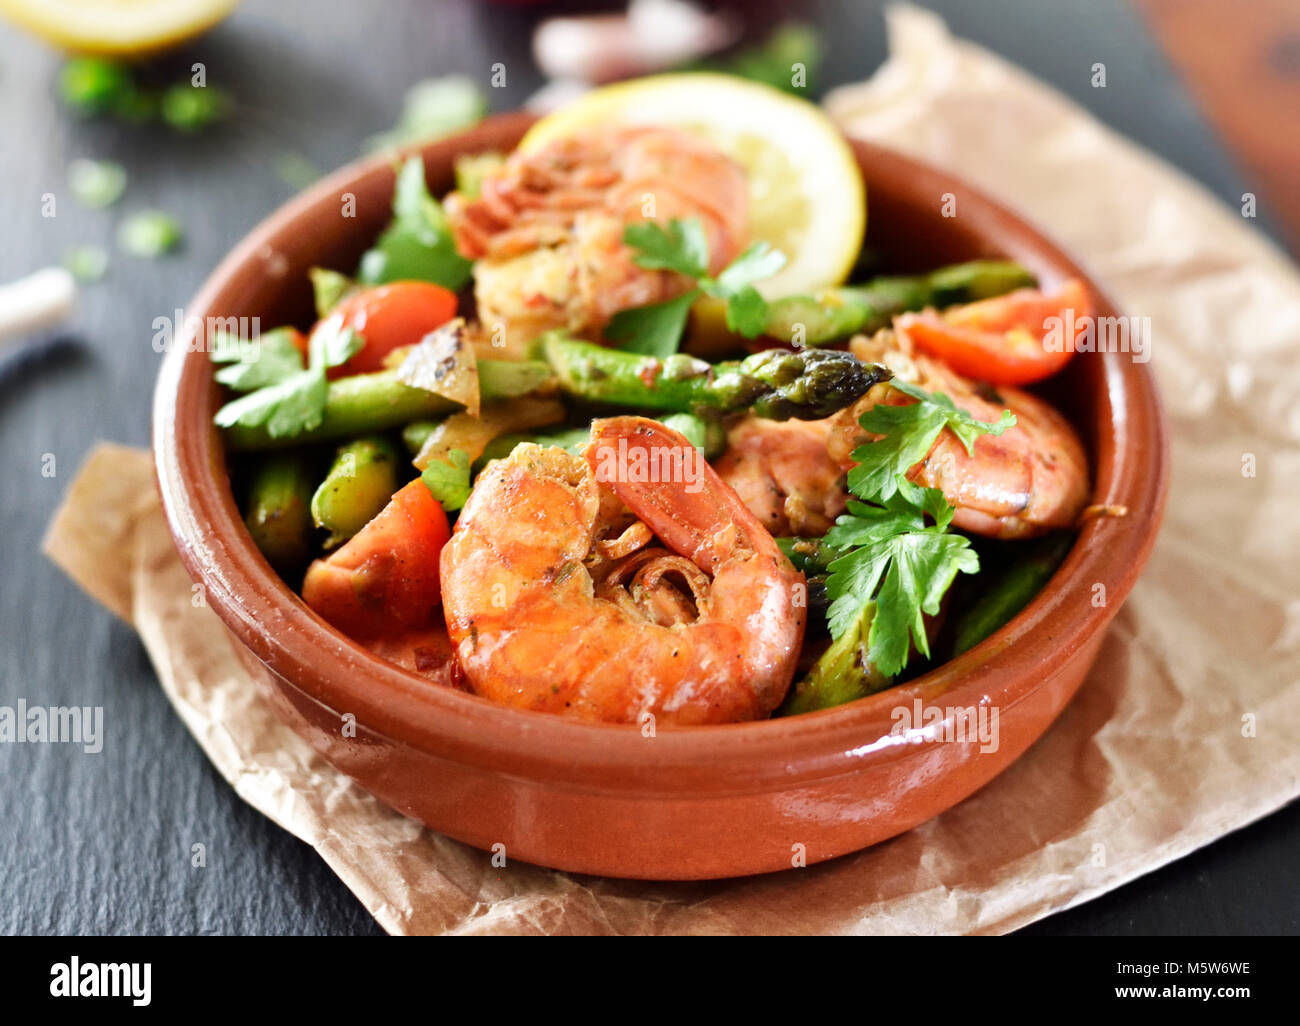 Delicious shrimp or seafood meal with green asparagus, tomatoes and decorative parsley. Spanish tapas plate in a bowl, close-up shot. Gourmet food. Stock Photo